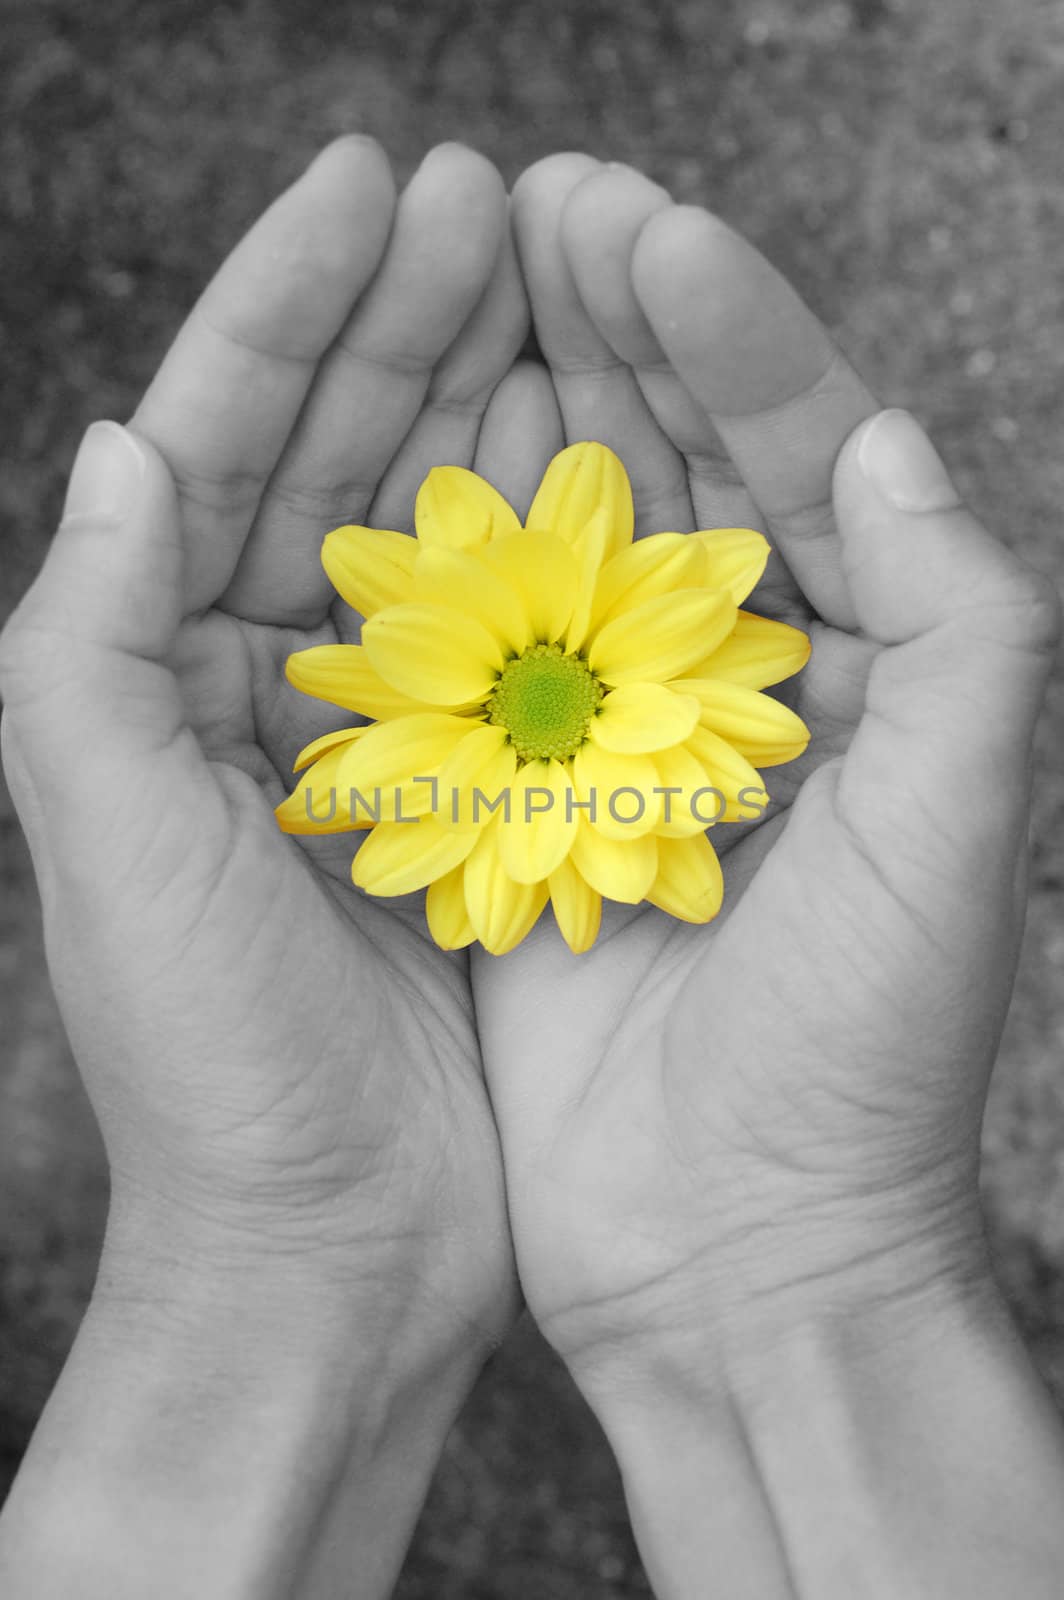 Hands in black and white holding a yellow daisy